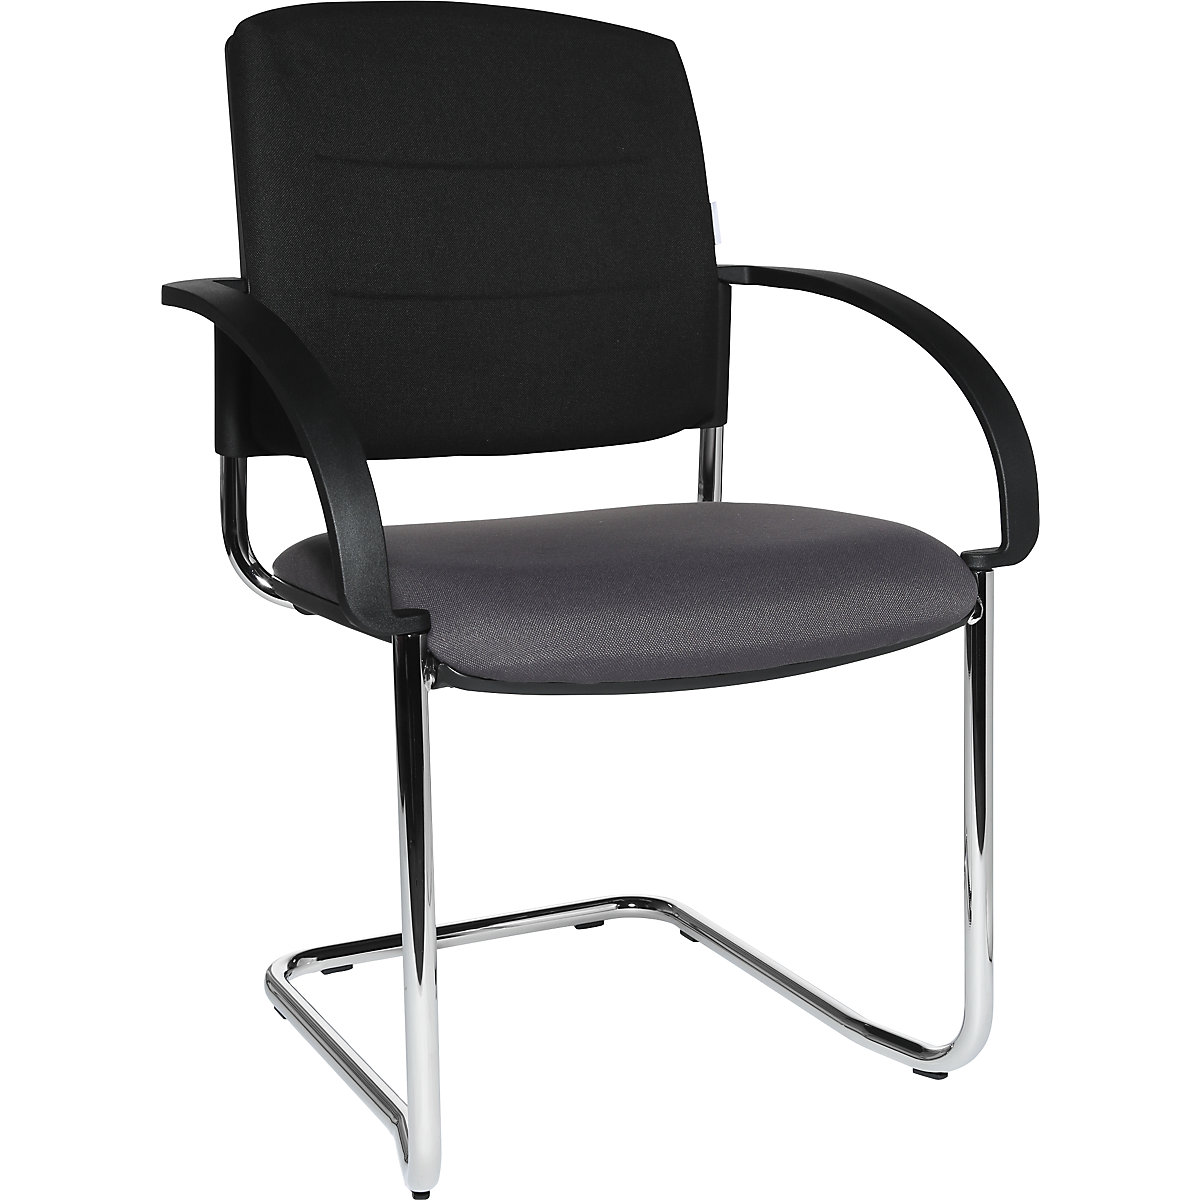 Cantilever chairs, pack of 2 – eurokraft pro